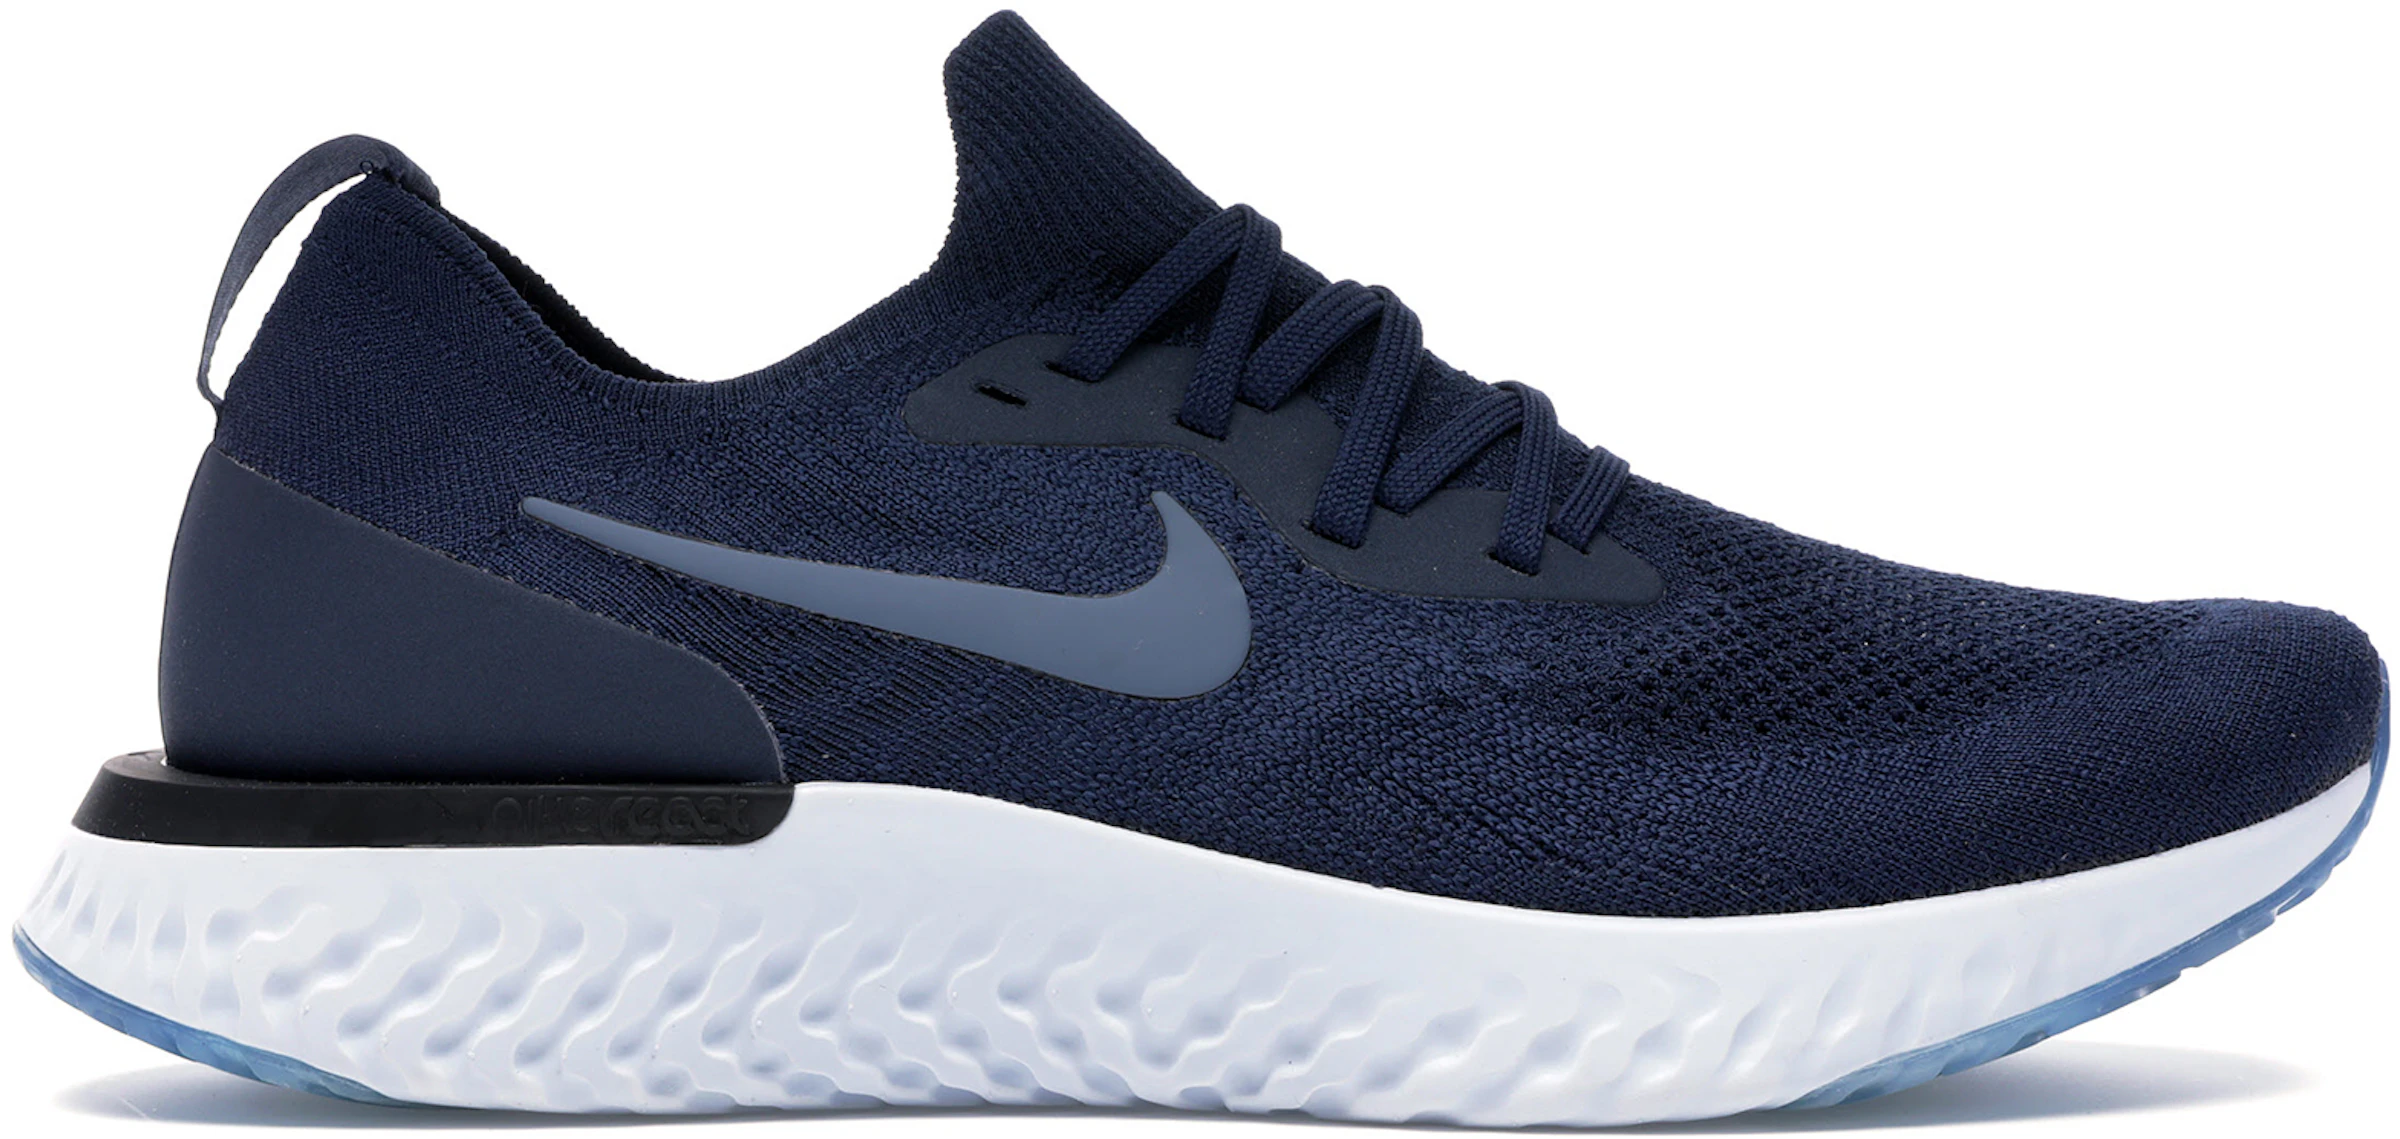 Nike Epic React Flyknit College Diffused Blue - AQ0067-402 - ES